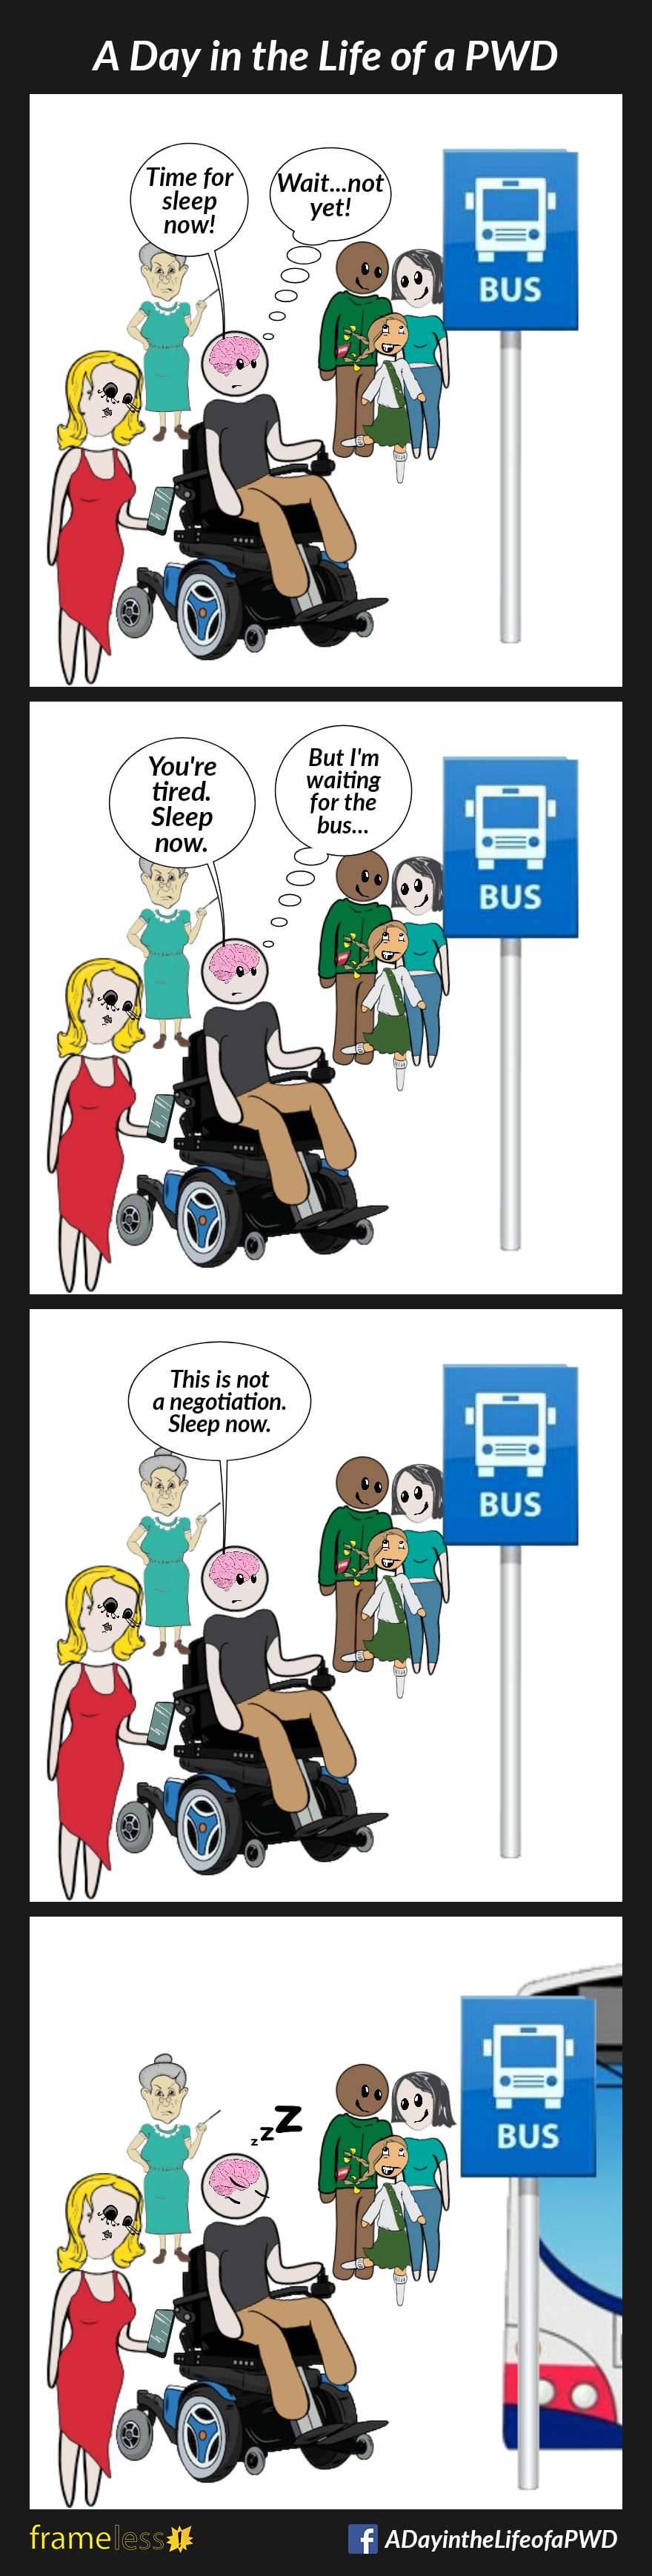 COMIC STRIP 
A Day in the Life of a PWD (Person With a Disability) 

Frame 1:
A man in a power wheelchair is waiting for the bus. His brain is talking to him.
BRAIN: Time for sleep now!
MAN: Wait...not yet!

Frame 2:
BRAIN: You're tired. Sleep now.
MAN: But I'm waiting for the bus...

Frame 3:
BRAIN: This is not a negotiation. Sleep now.

Frame 4:
The bus has arrived, and the man is fast asleep.